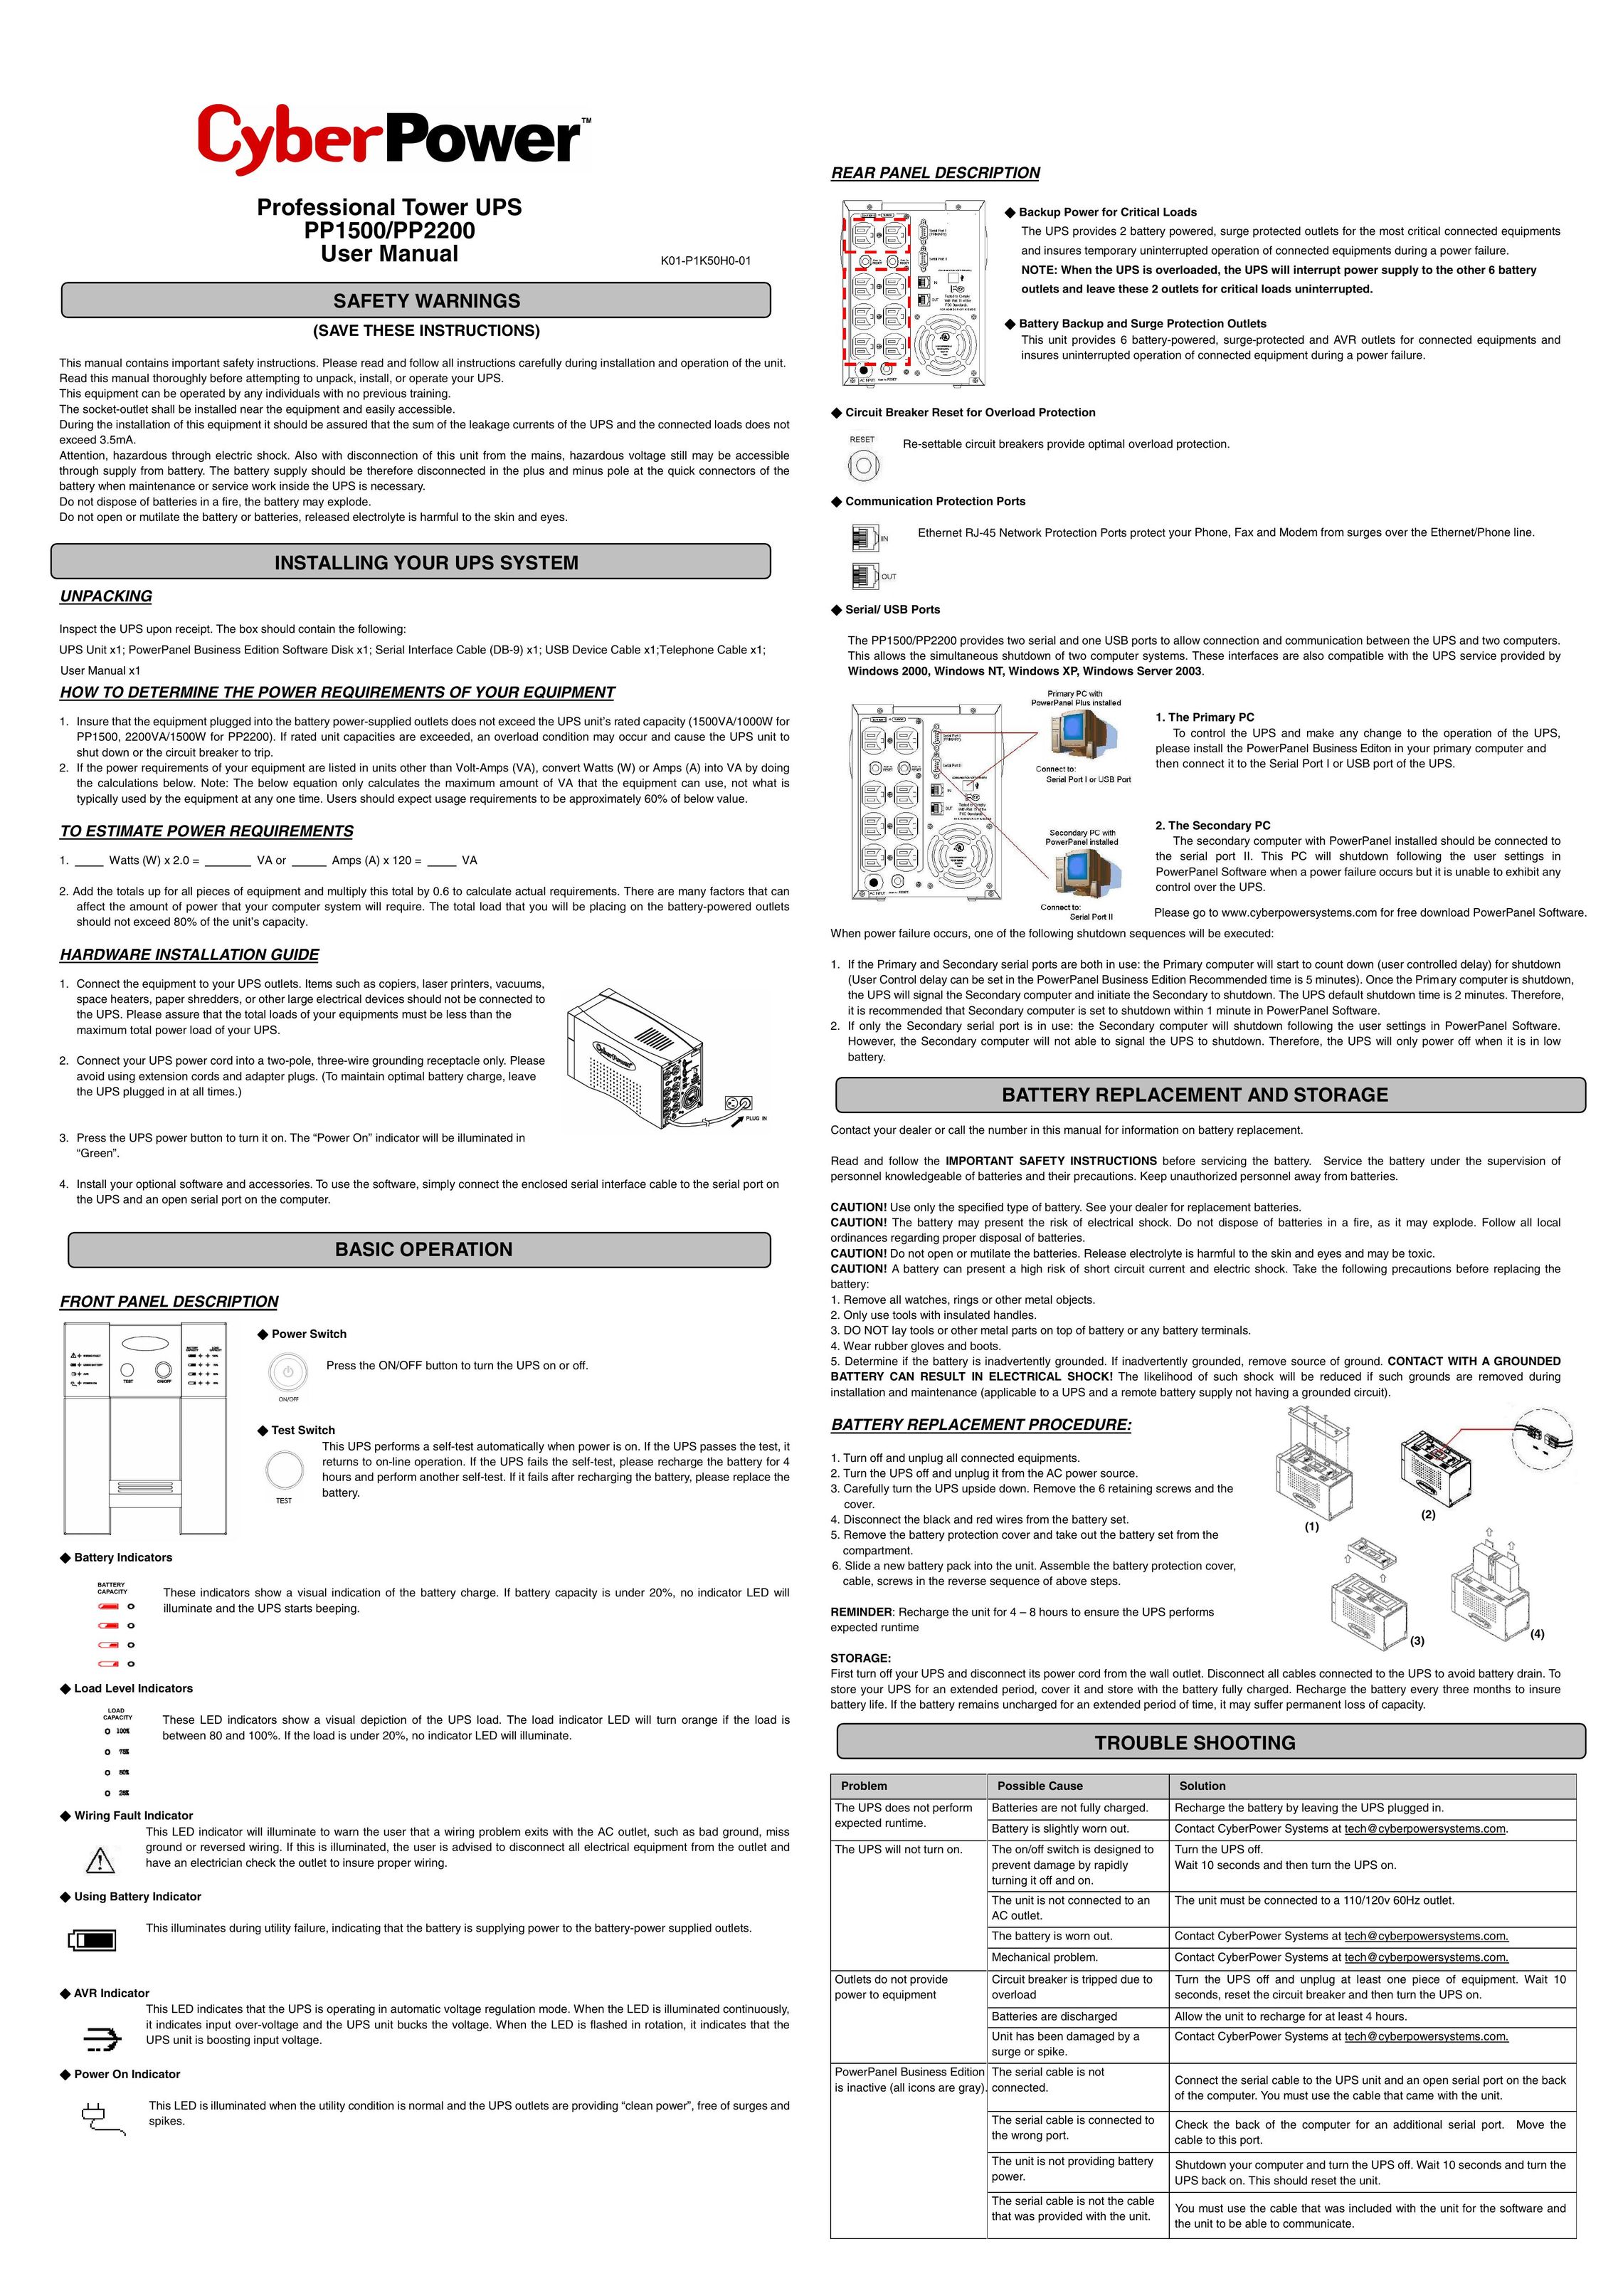 CyberPower PP1500 Power Supply User Manual